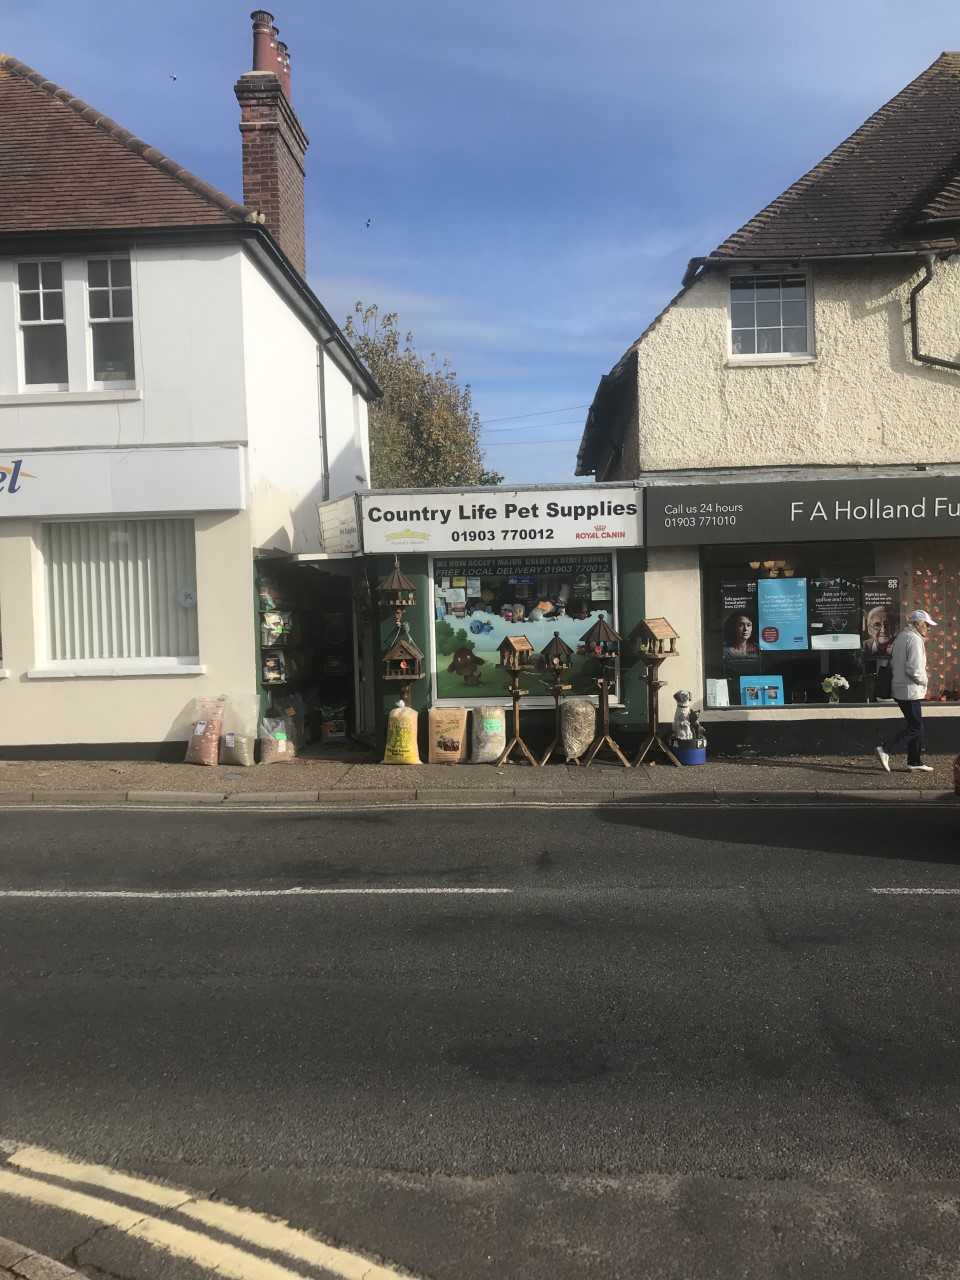 Country Life Pet Supplies in Rustington (1)